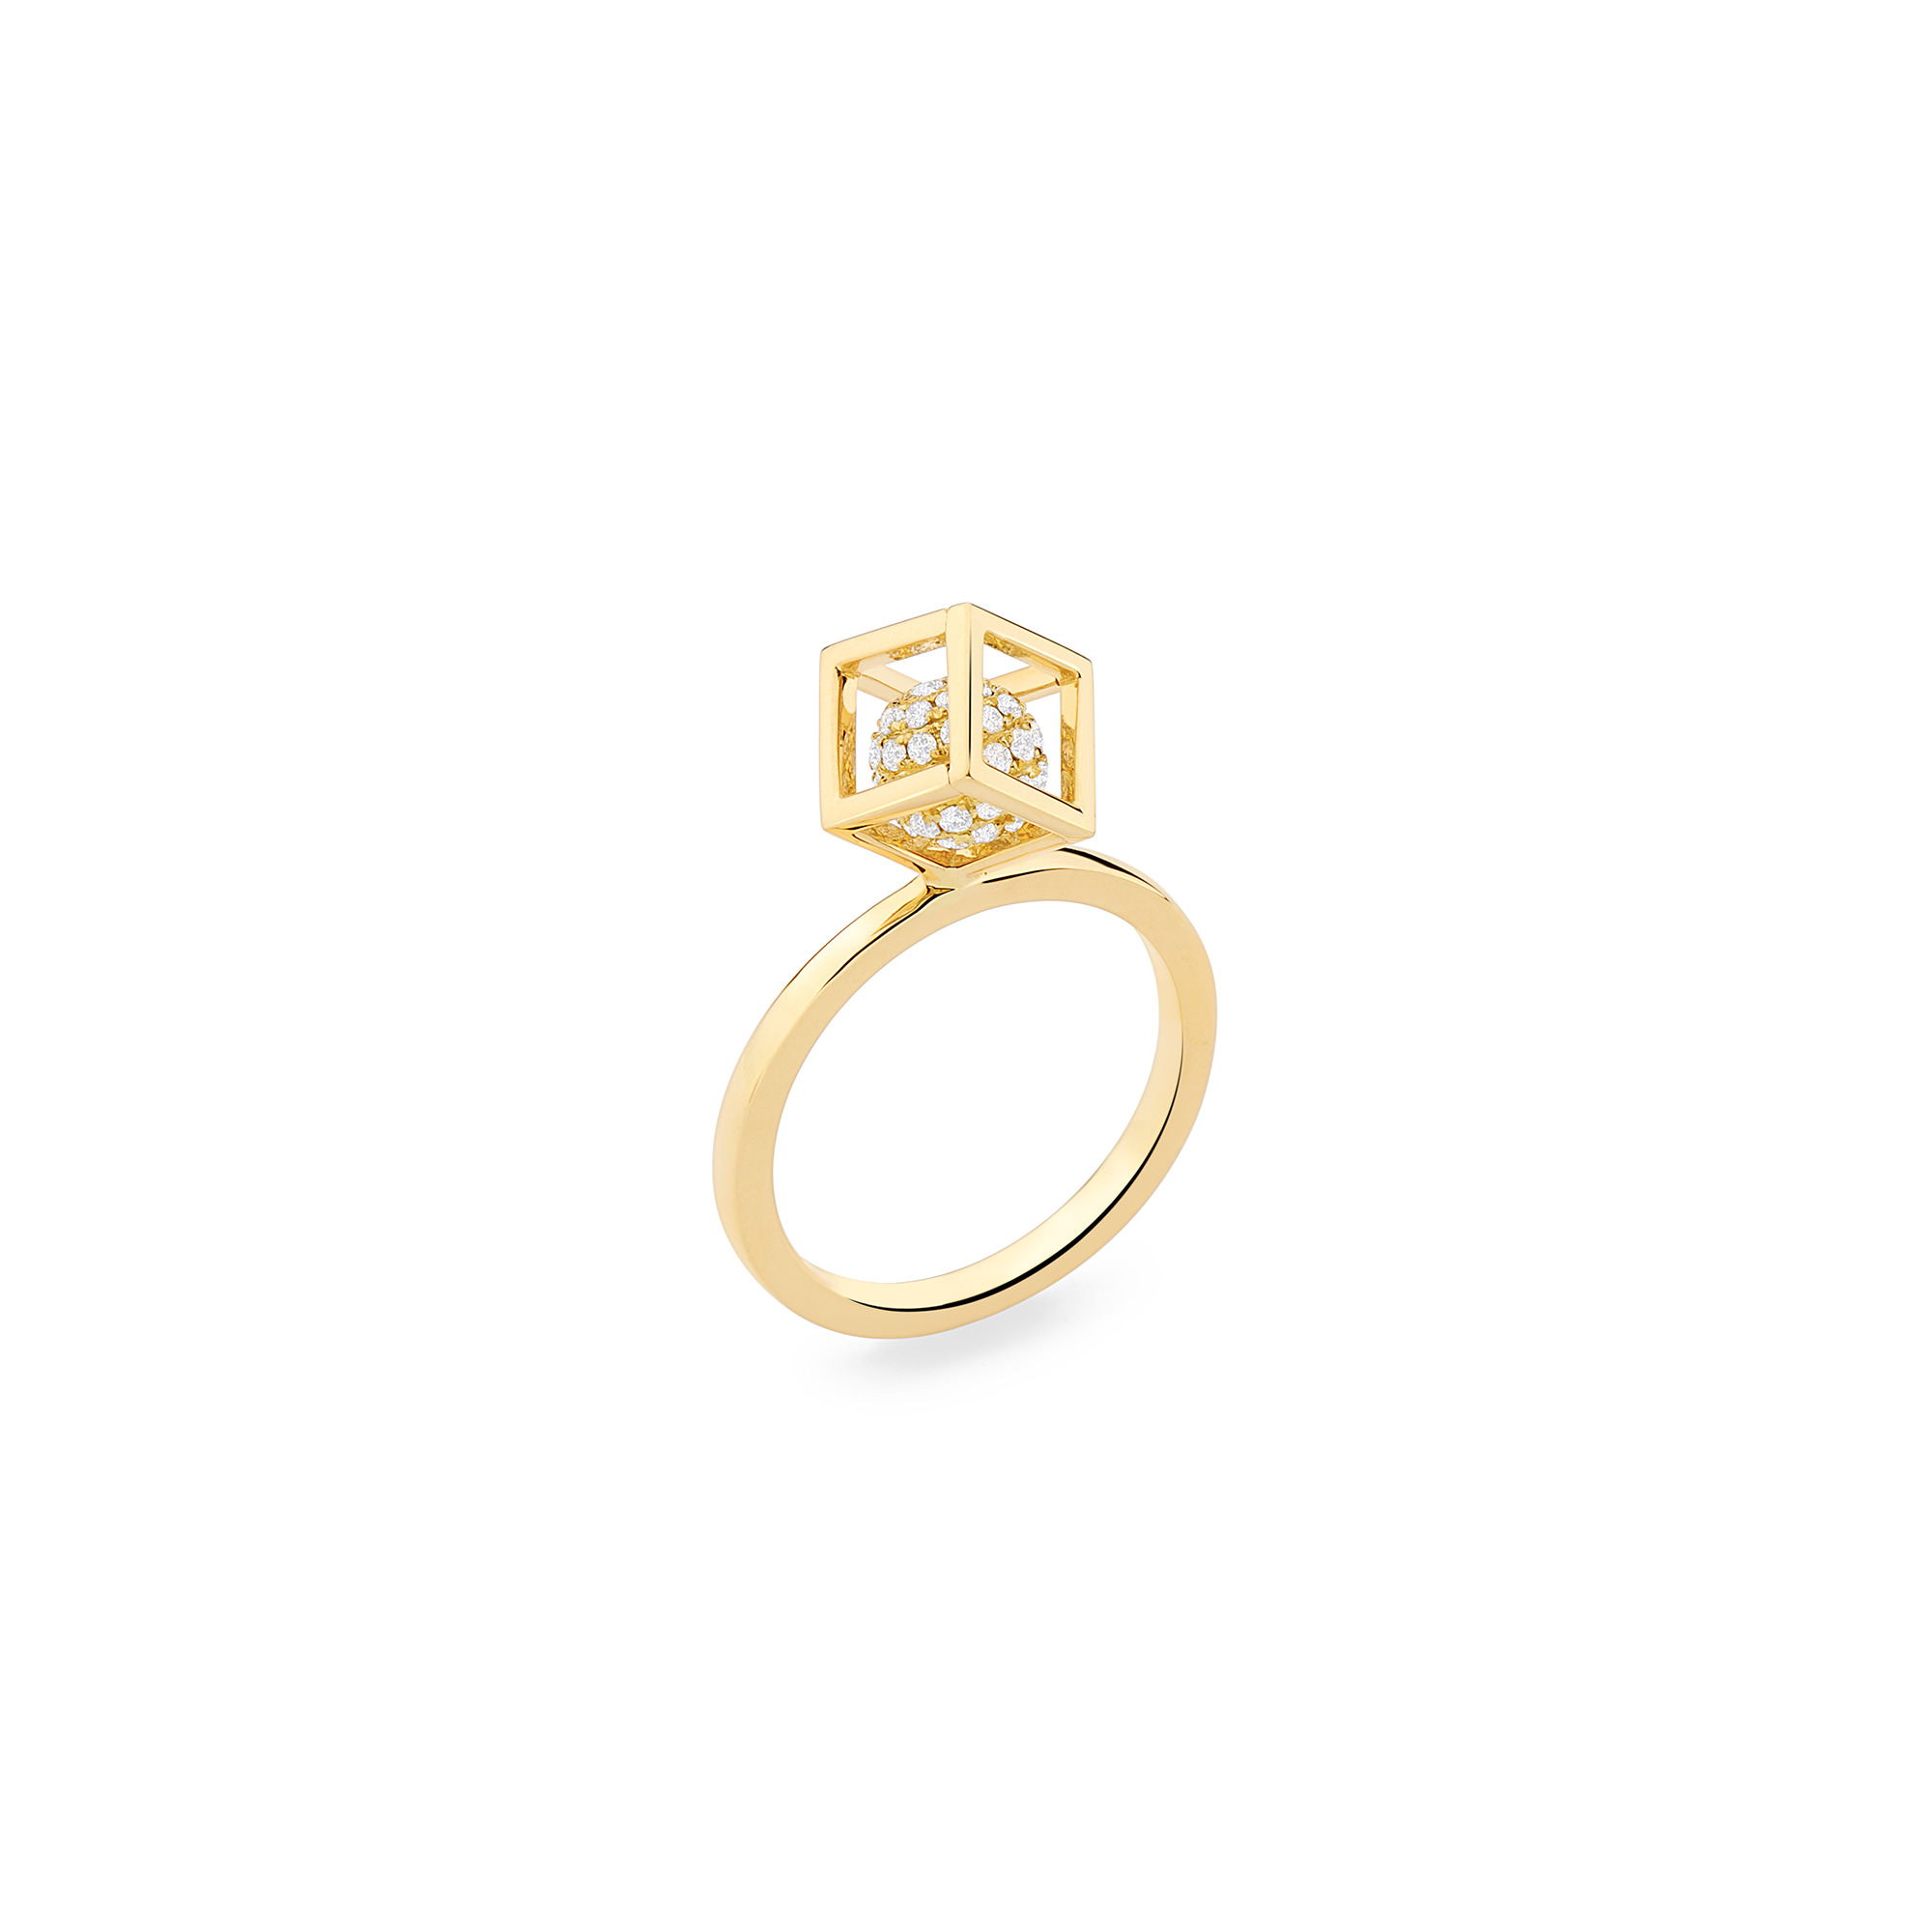 Gold Diamond Stacking Ring – Solo Rotated 6mm Stacking Ring | Yael Sonia